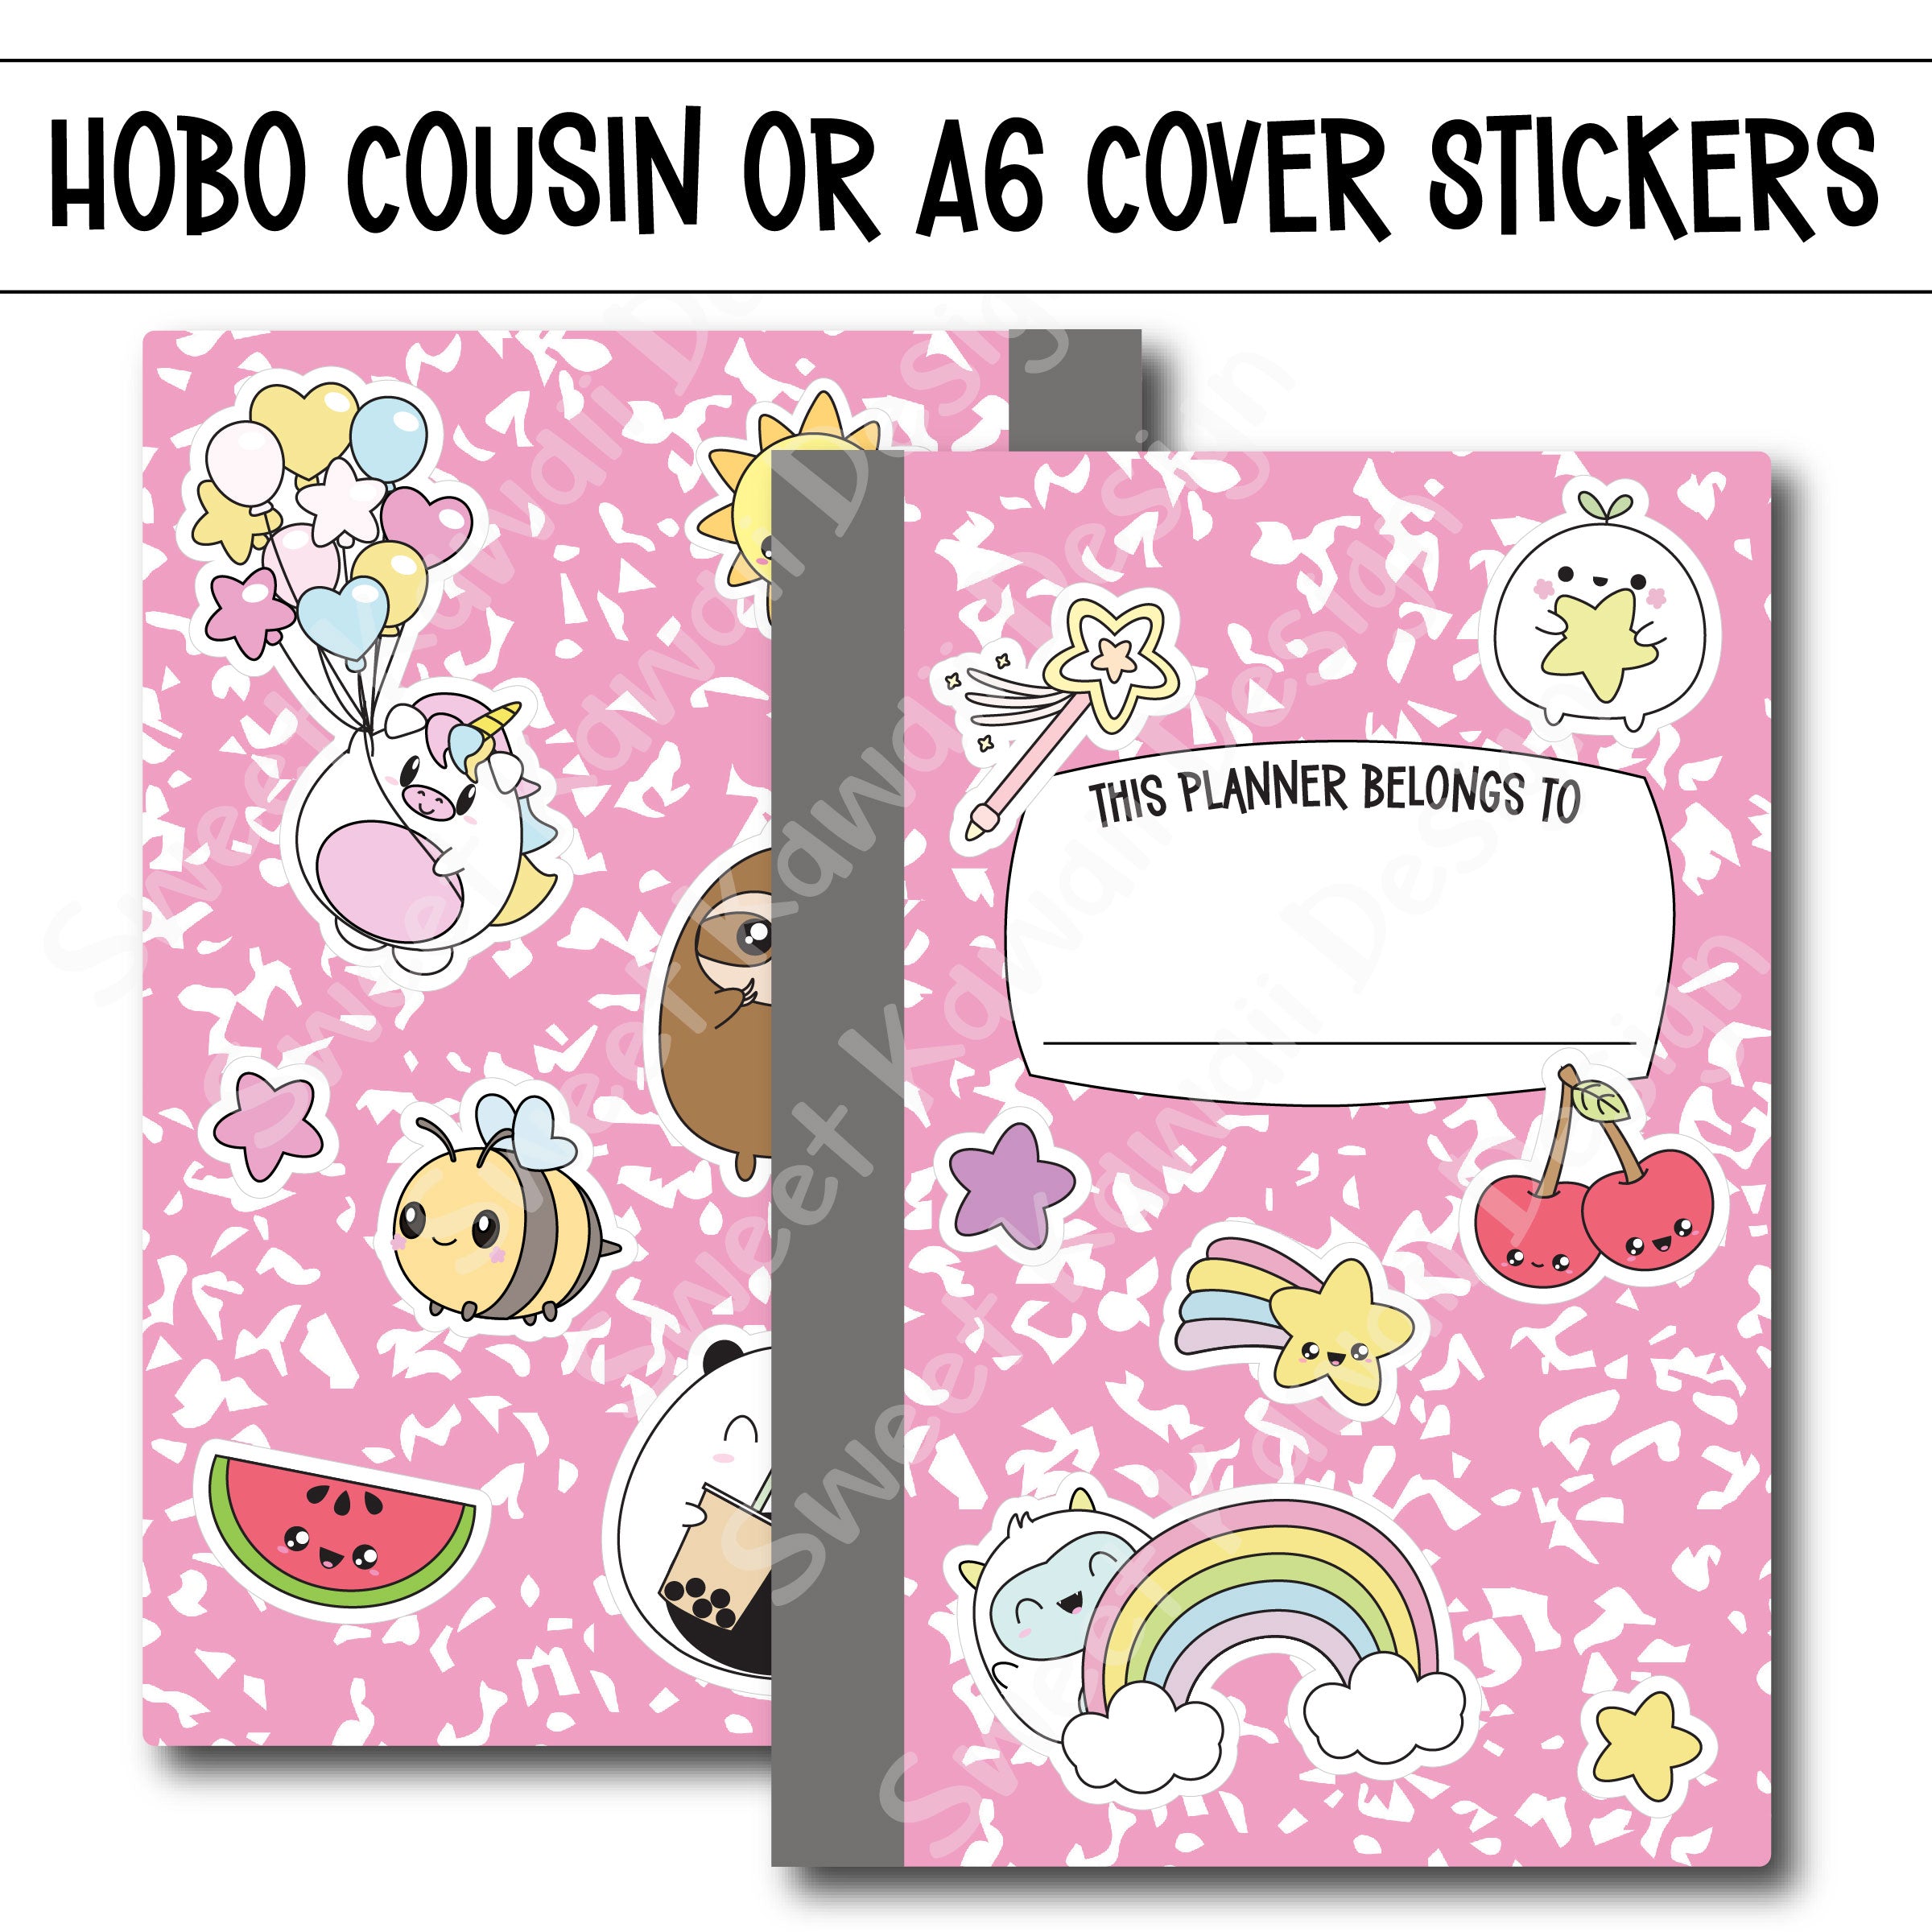 Hobonichi Cover Sticker - Composition Notebook - Cousin or A6